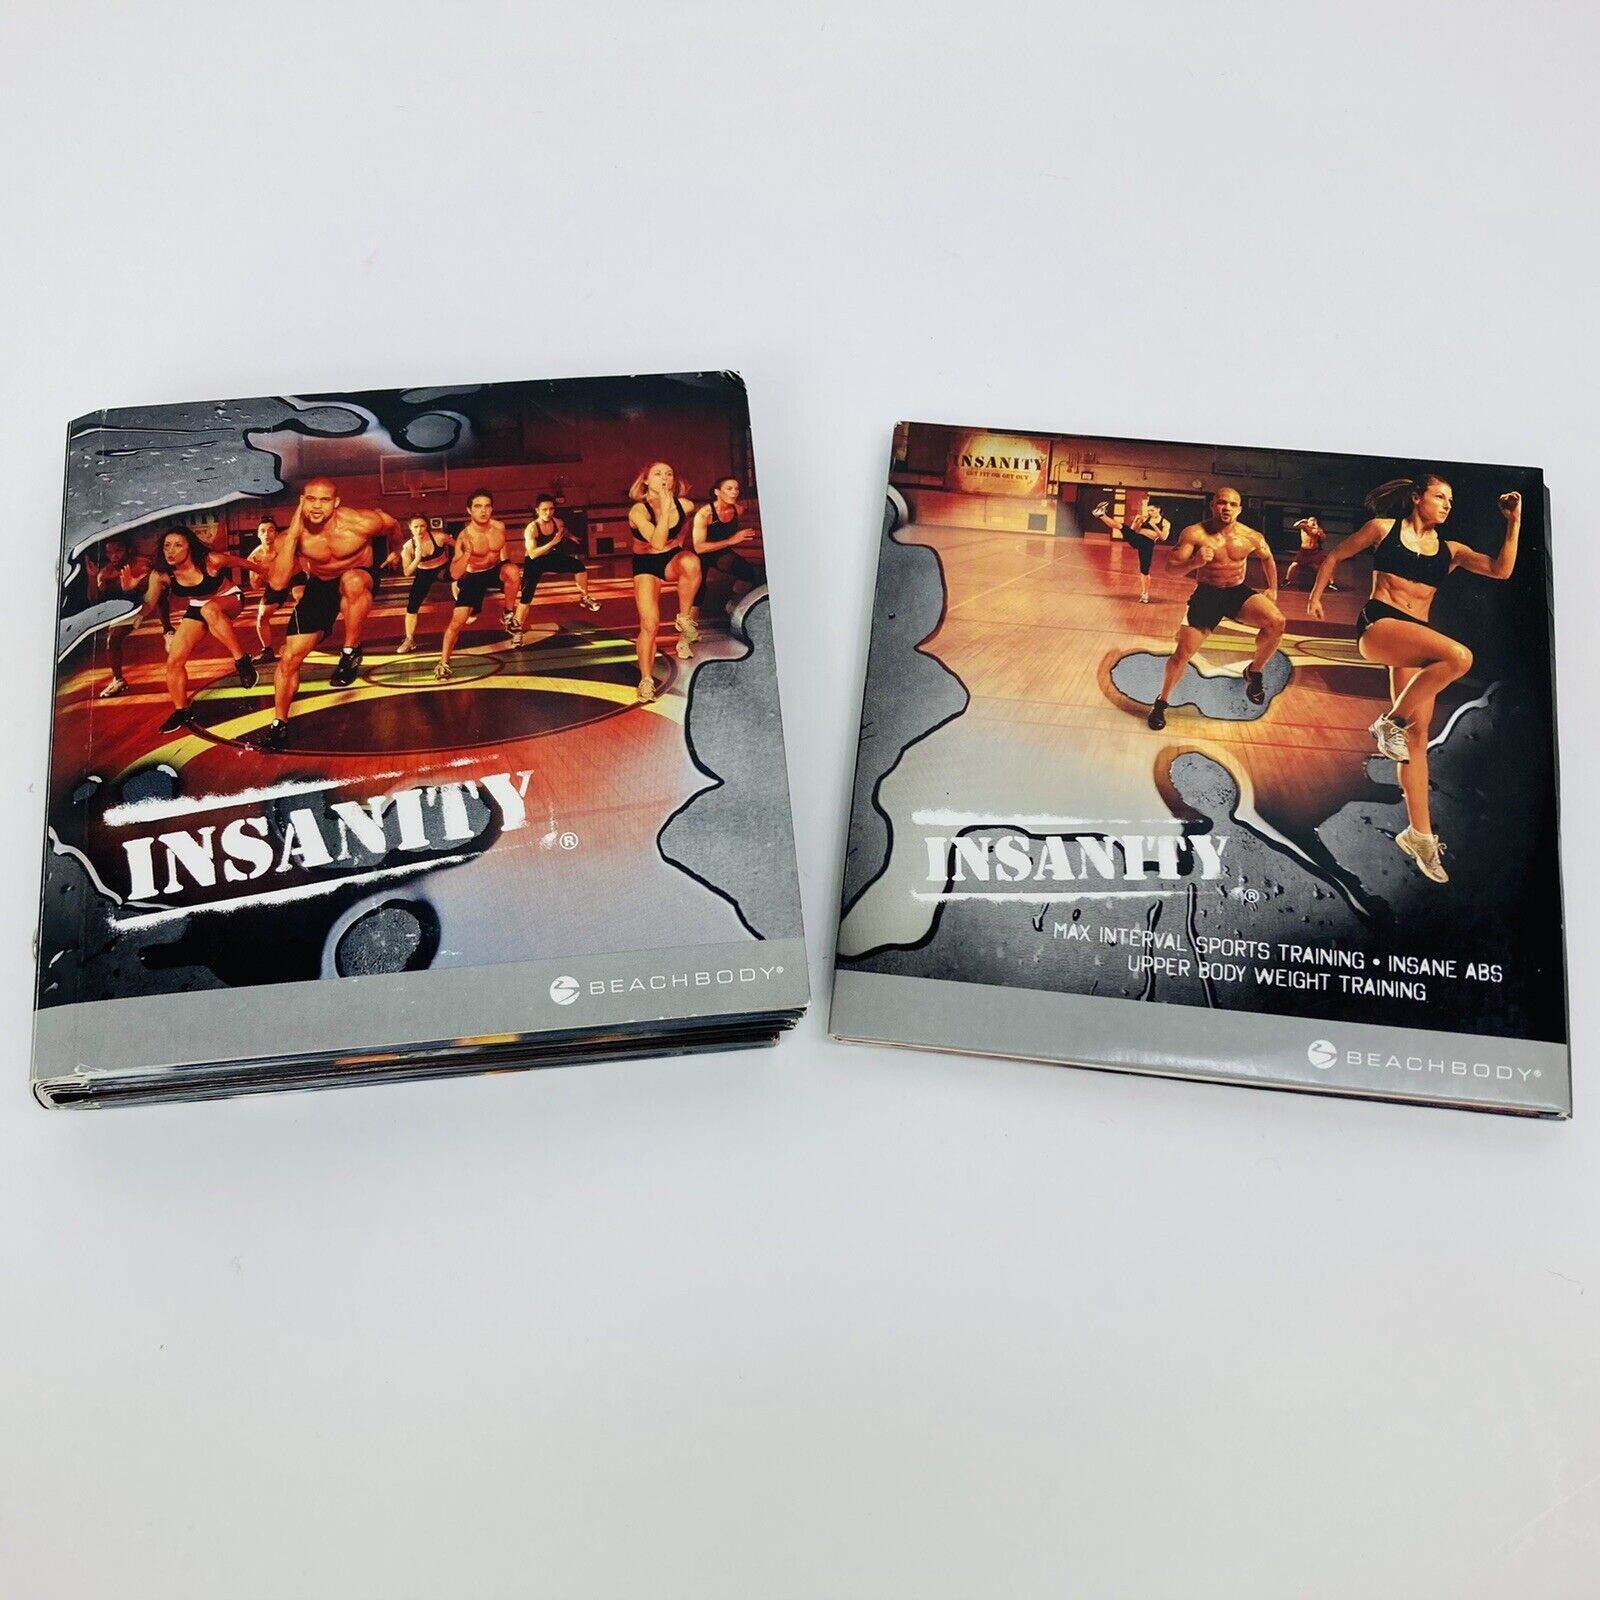 Beachbody Insanity 13 Dvd Fitness Set Ultimate Cardio Workout With Shaun T